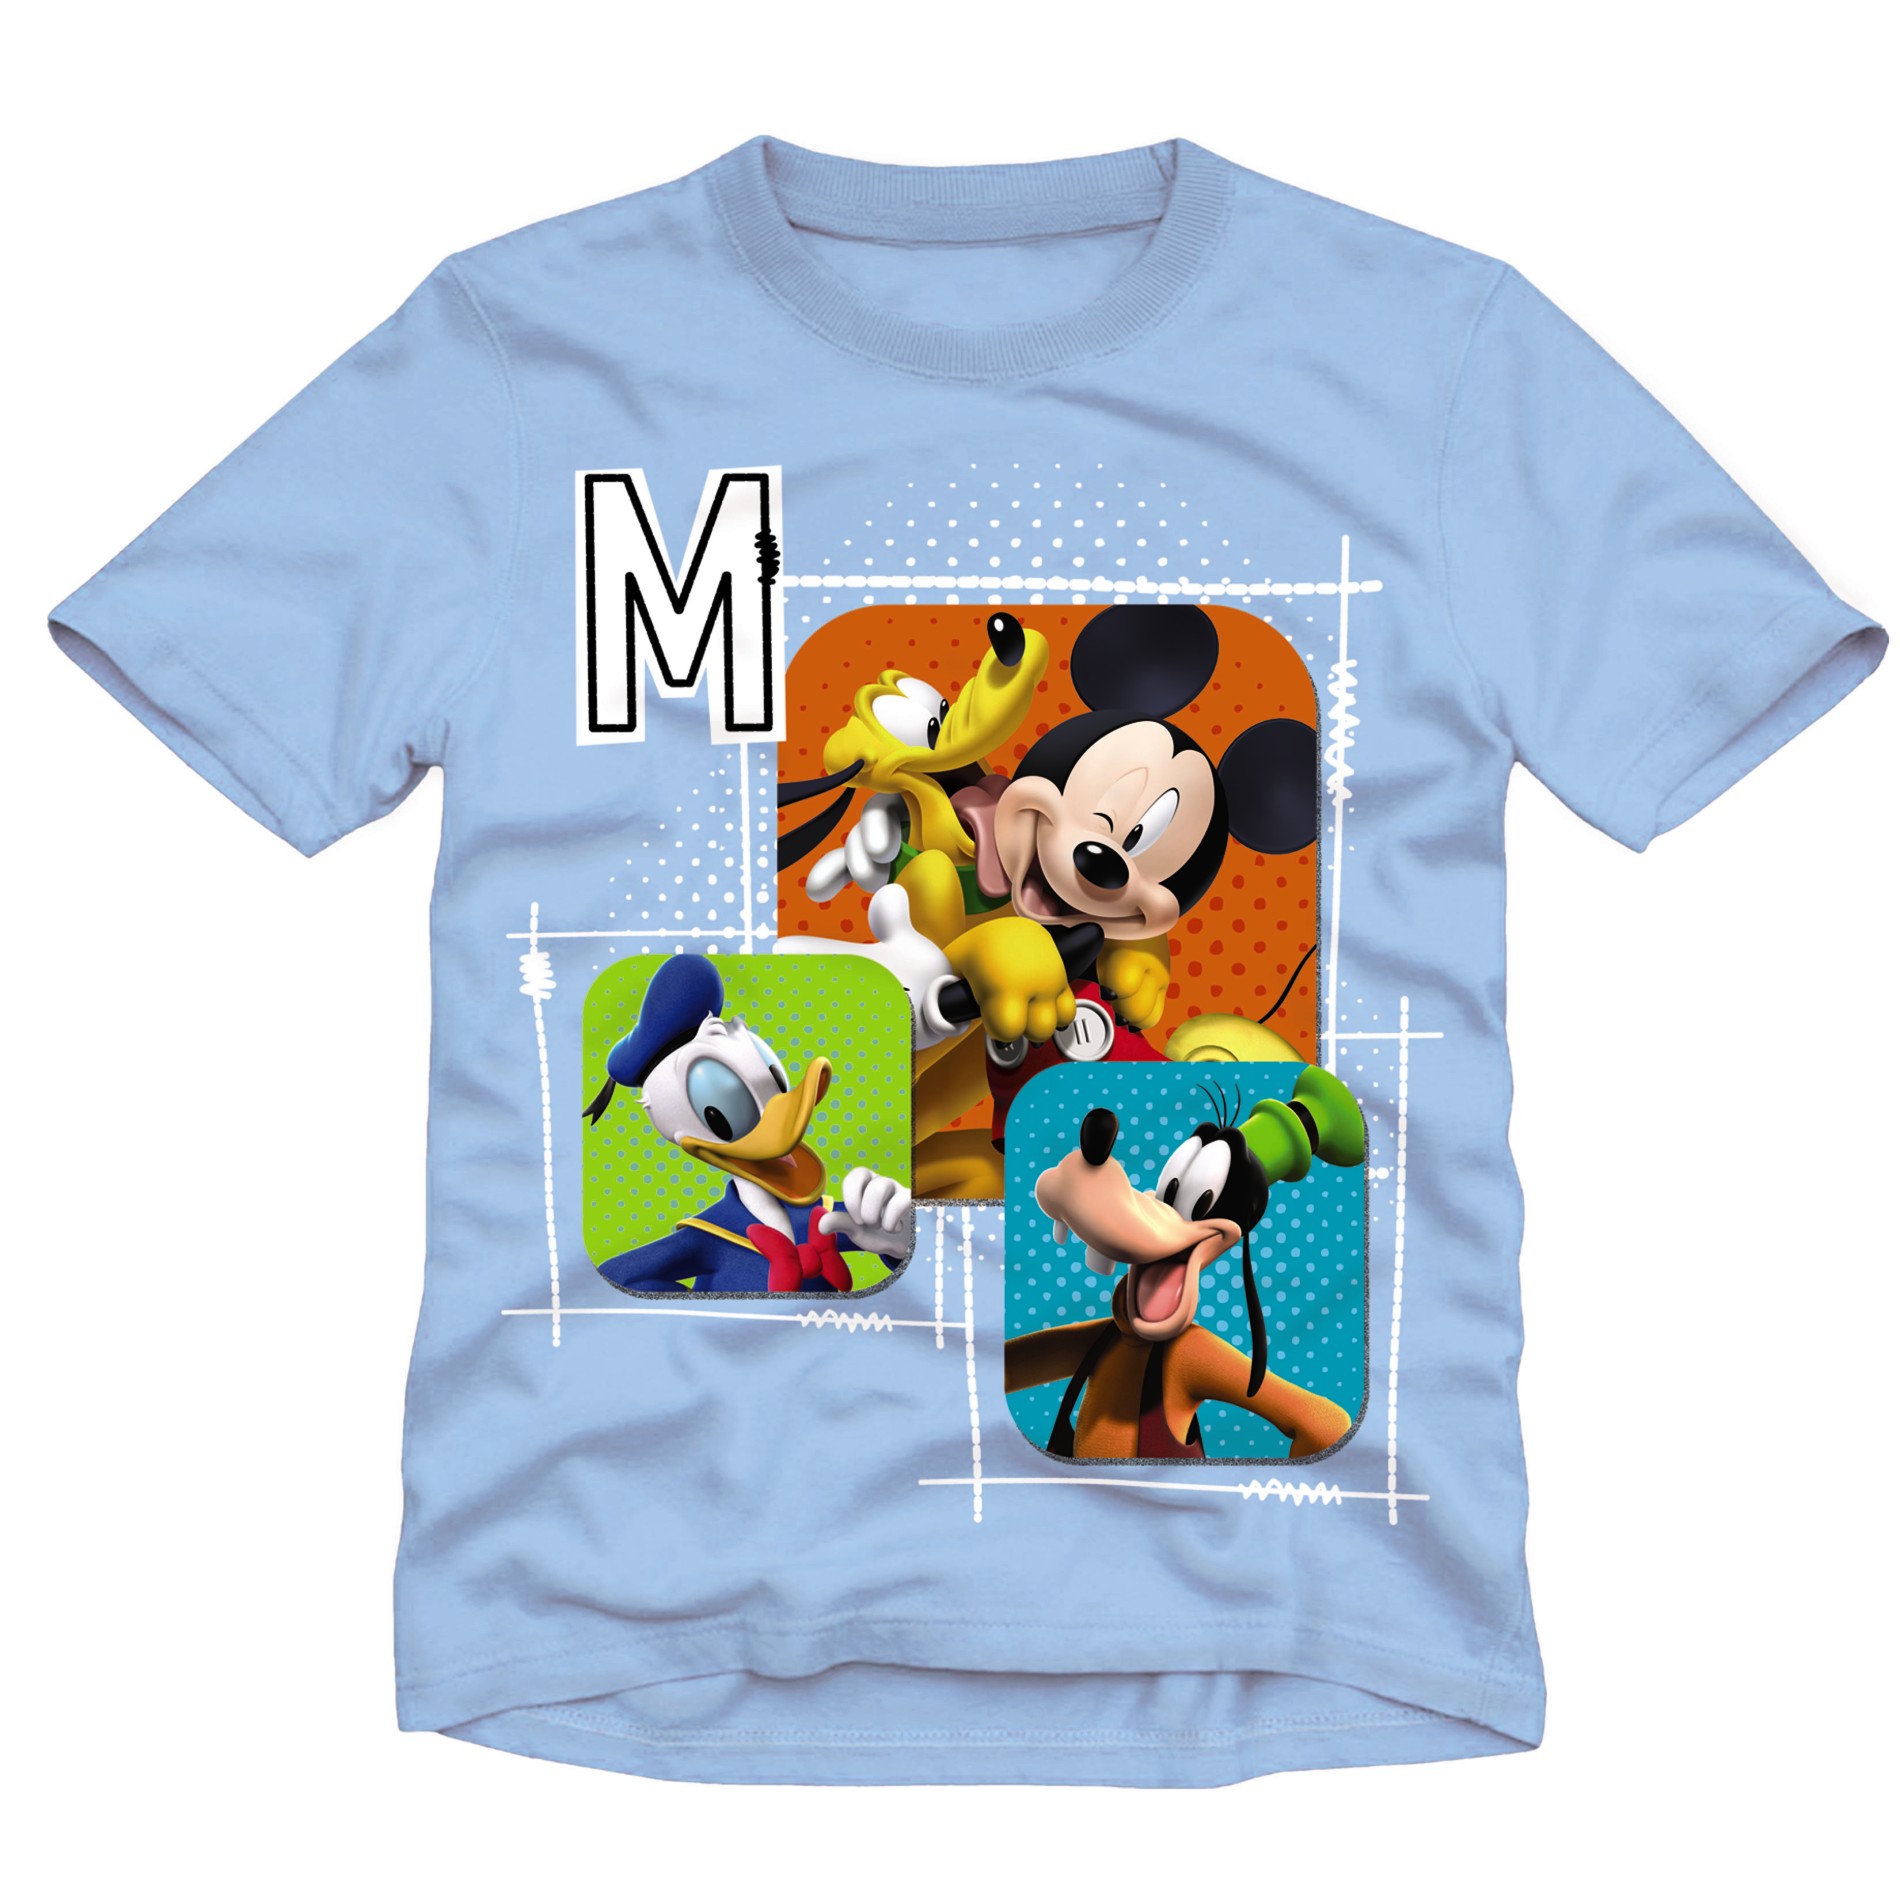 Disney Toddler Boy's Graphic T-Shirt - Mickey Mouse